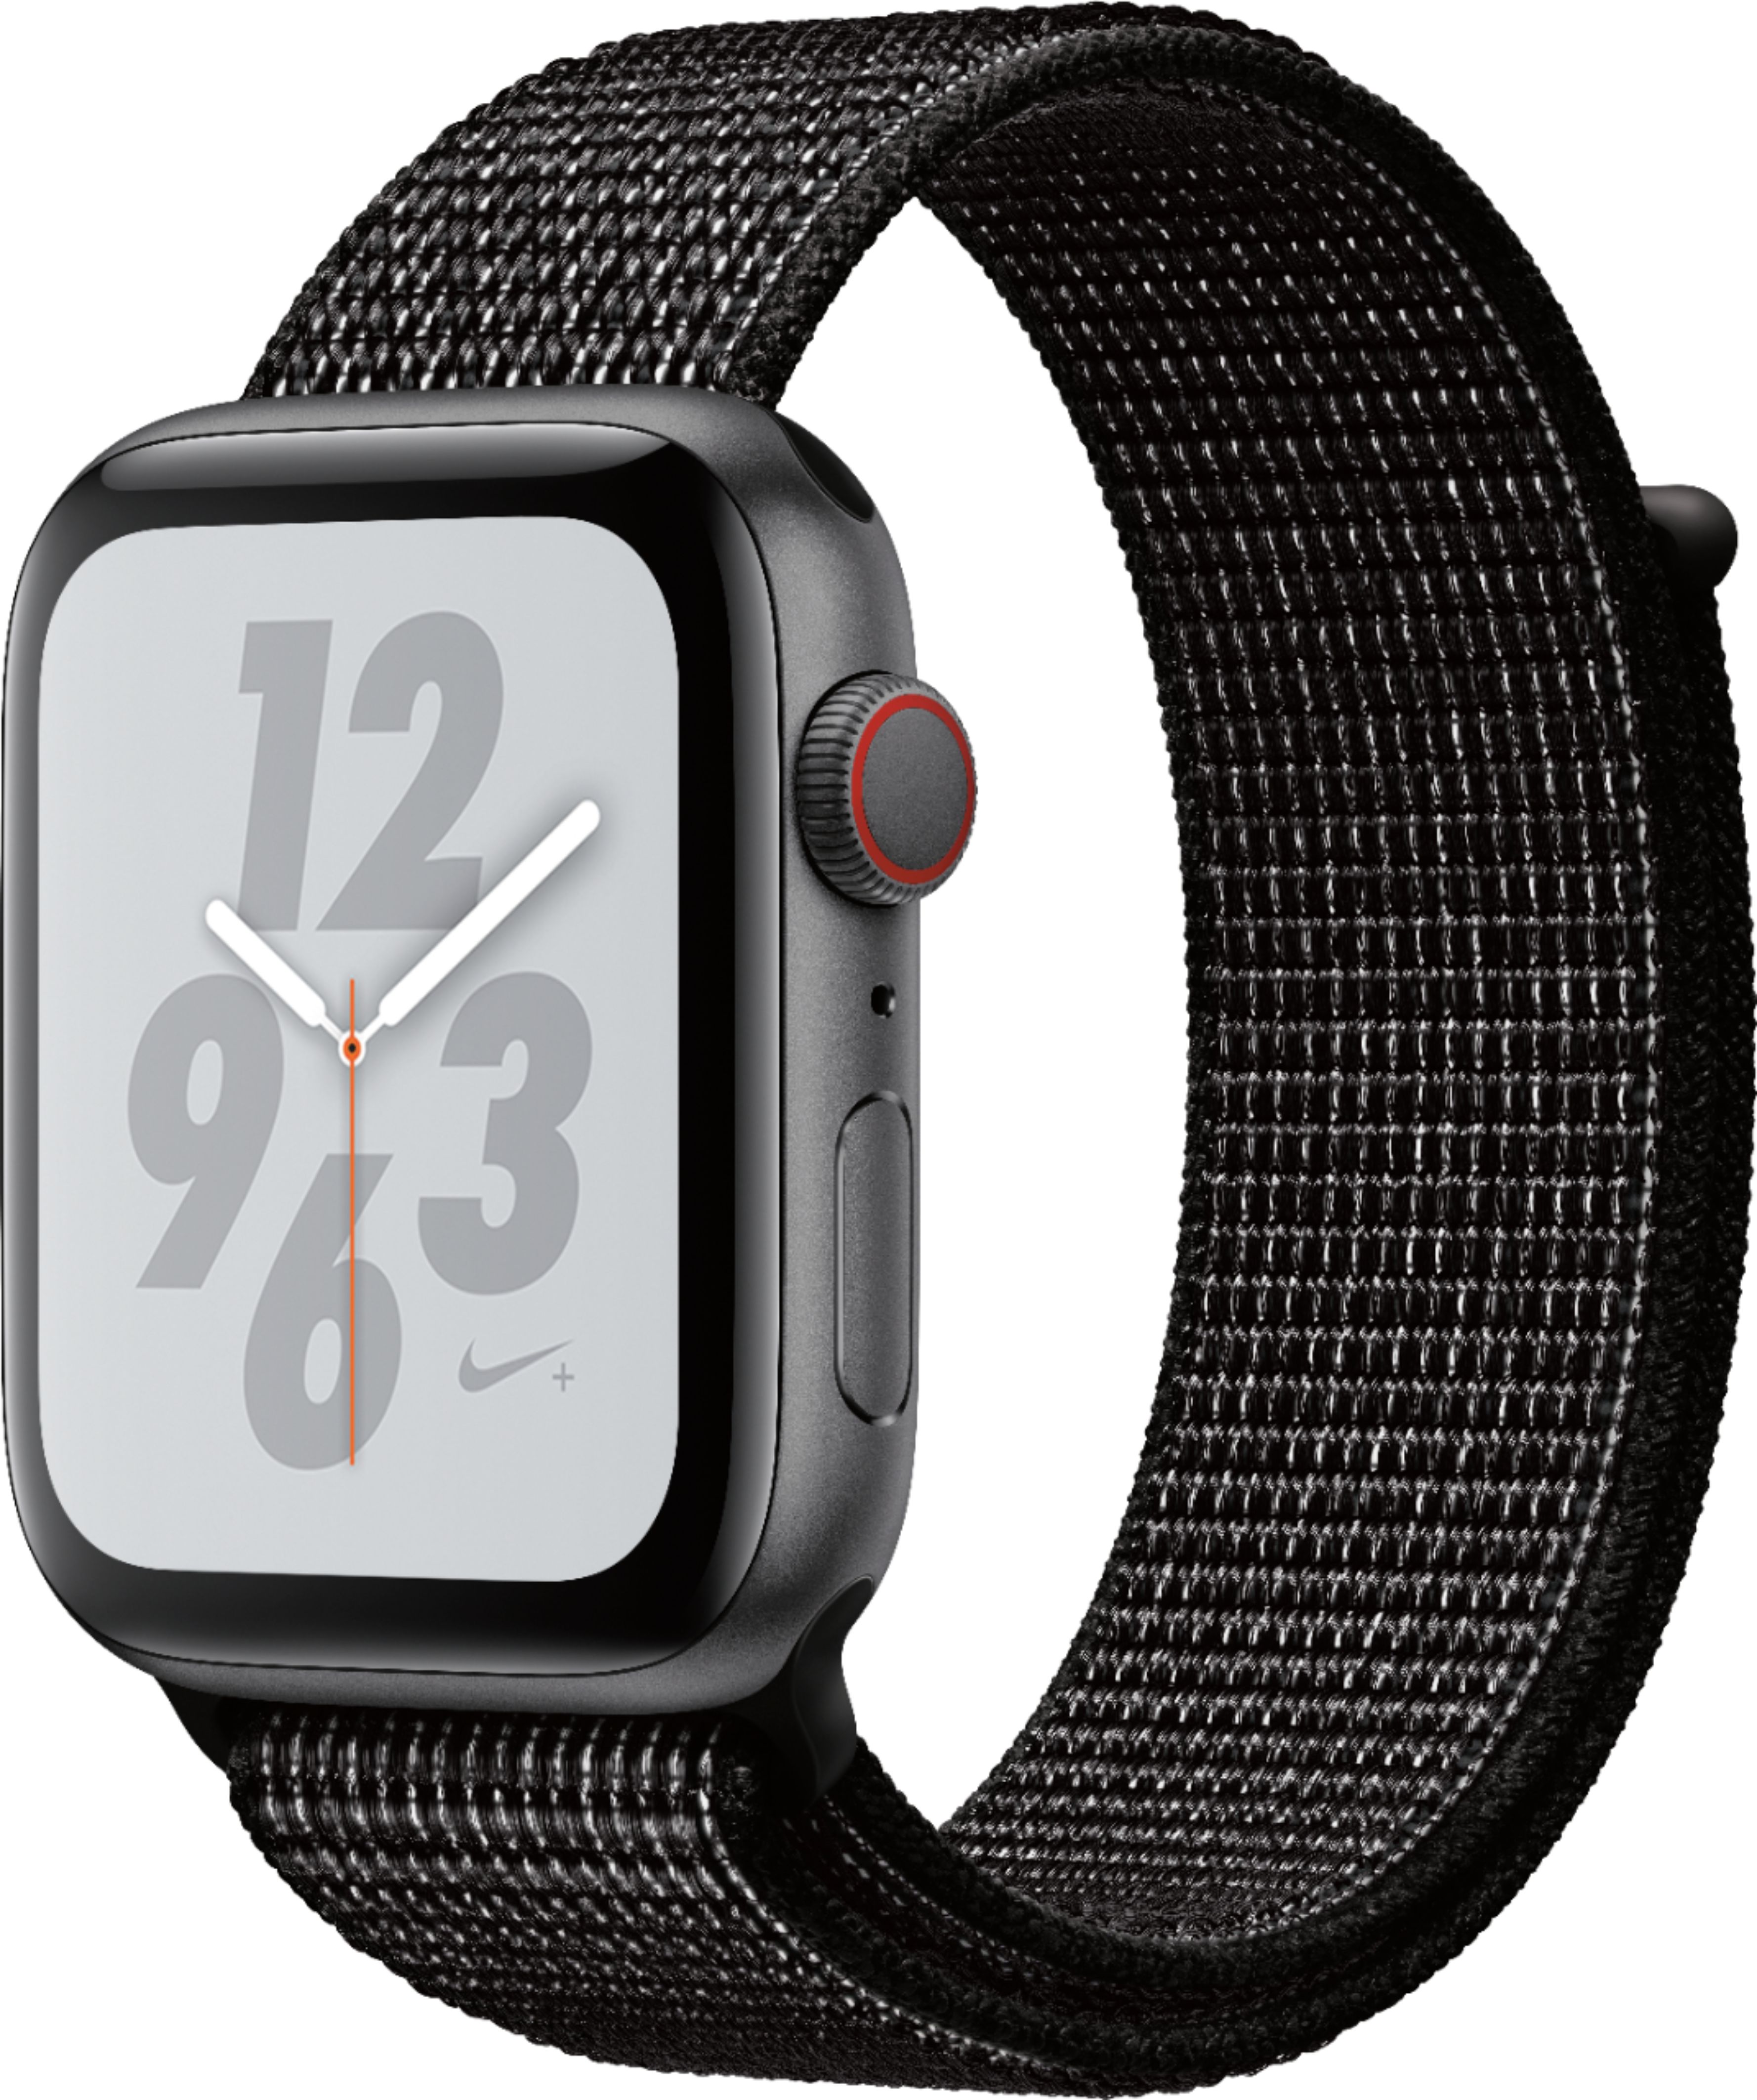 Apple Watch Nike+ Series 4 (GPS + Cellular) 44mm Space Gray